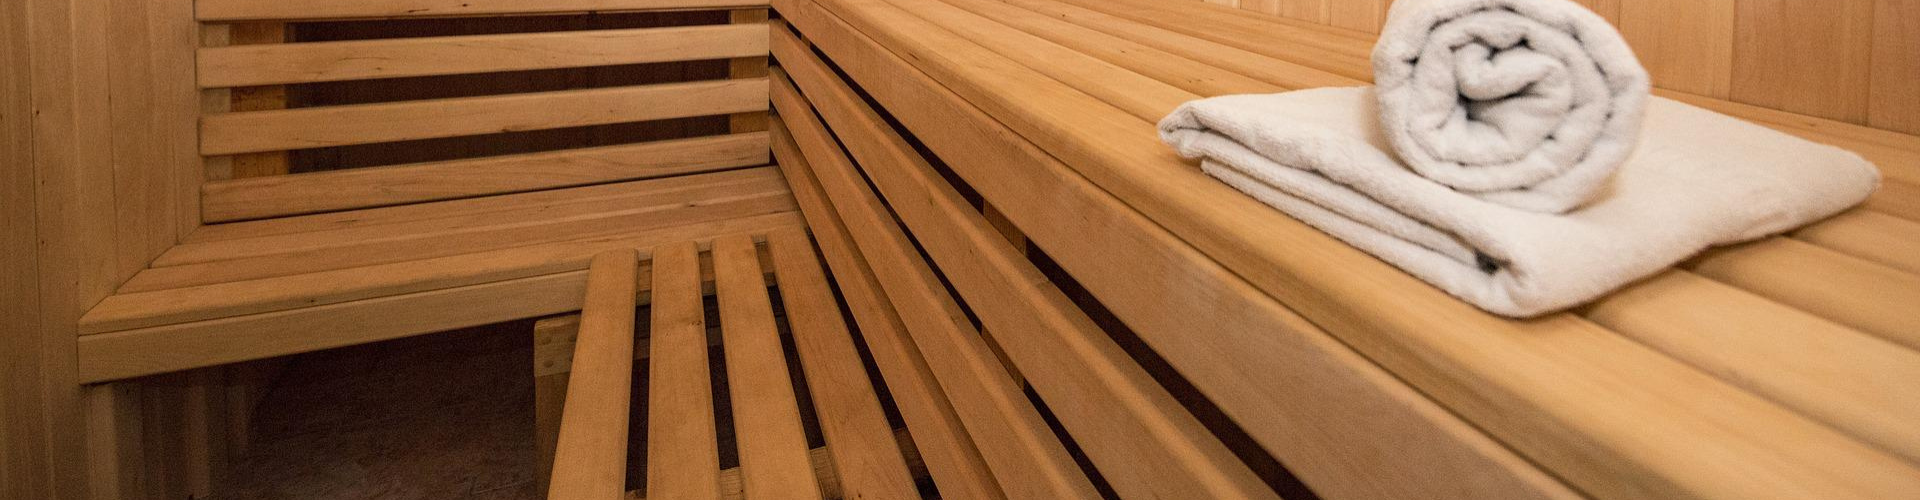 close up of wooden sauna benches